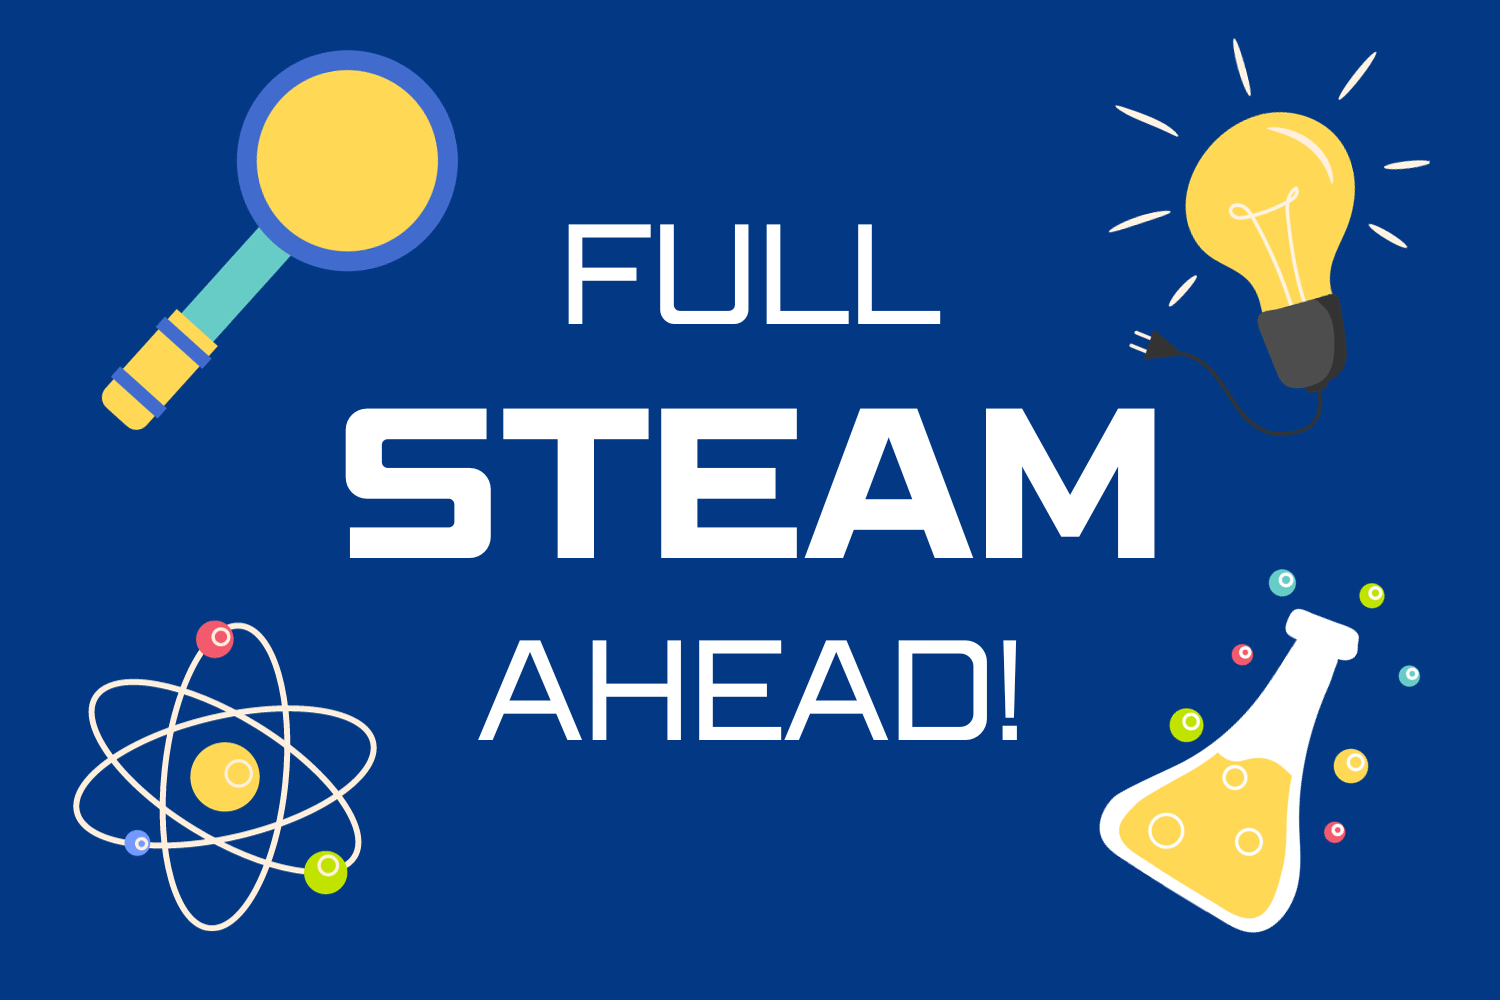 "Full STEAM Ahead" surrounded by a magnifying glass, lightbulb, chemistry beaker, and an atom